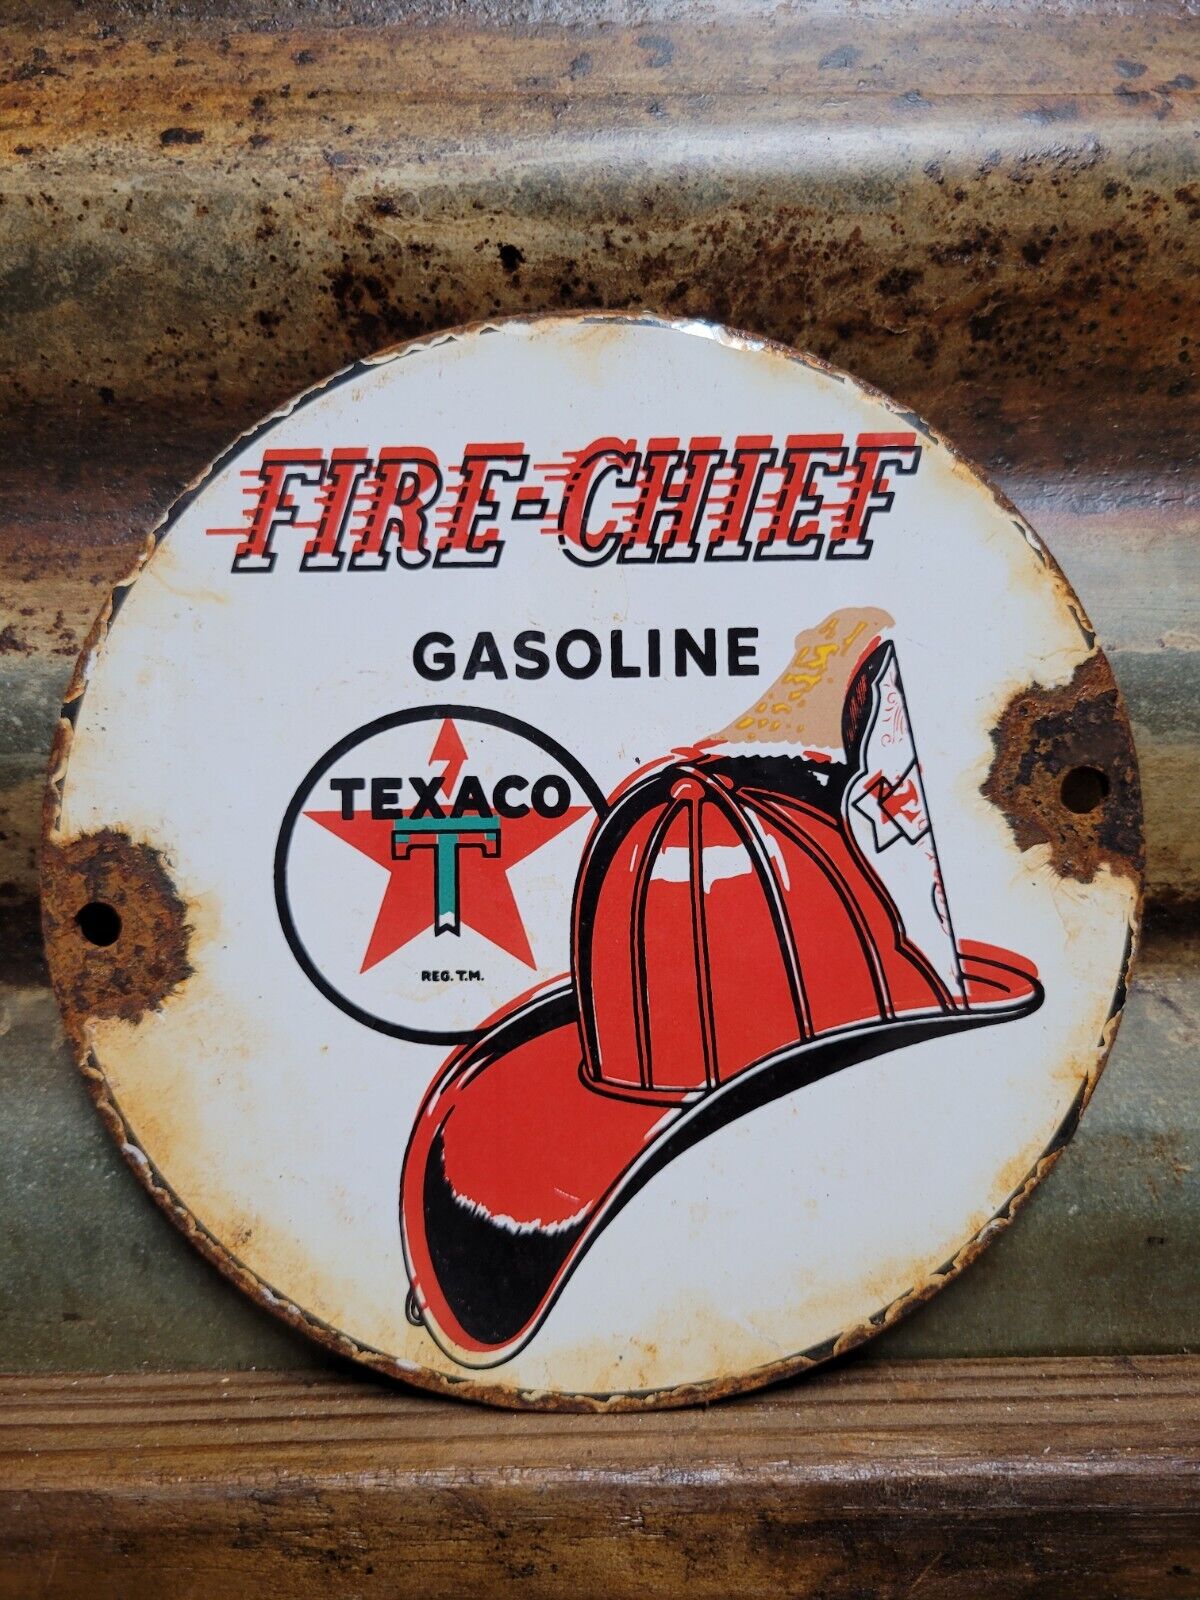 VINTAGE TEXACO PORCELAIN SIGN OLD FIRE CHIEF GAS STATION PUMP PLATE MOTOR OIL 6\